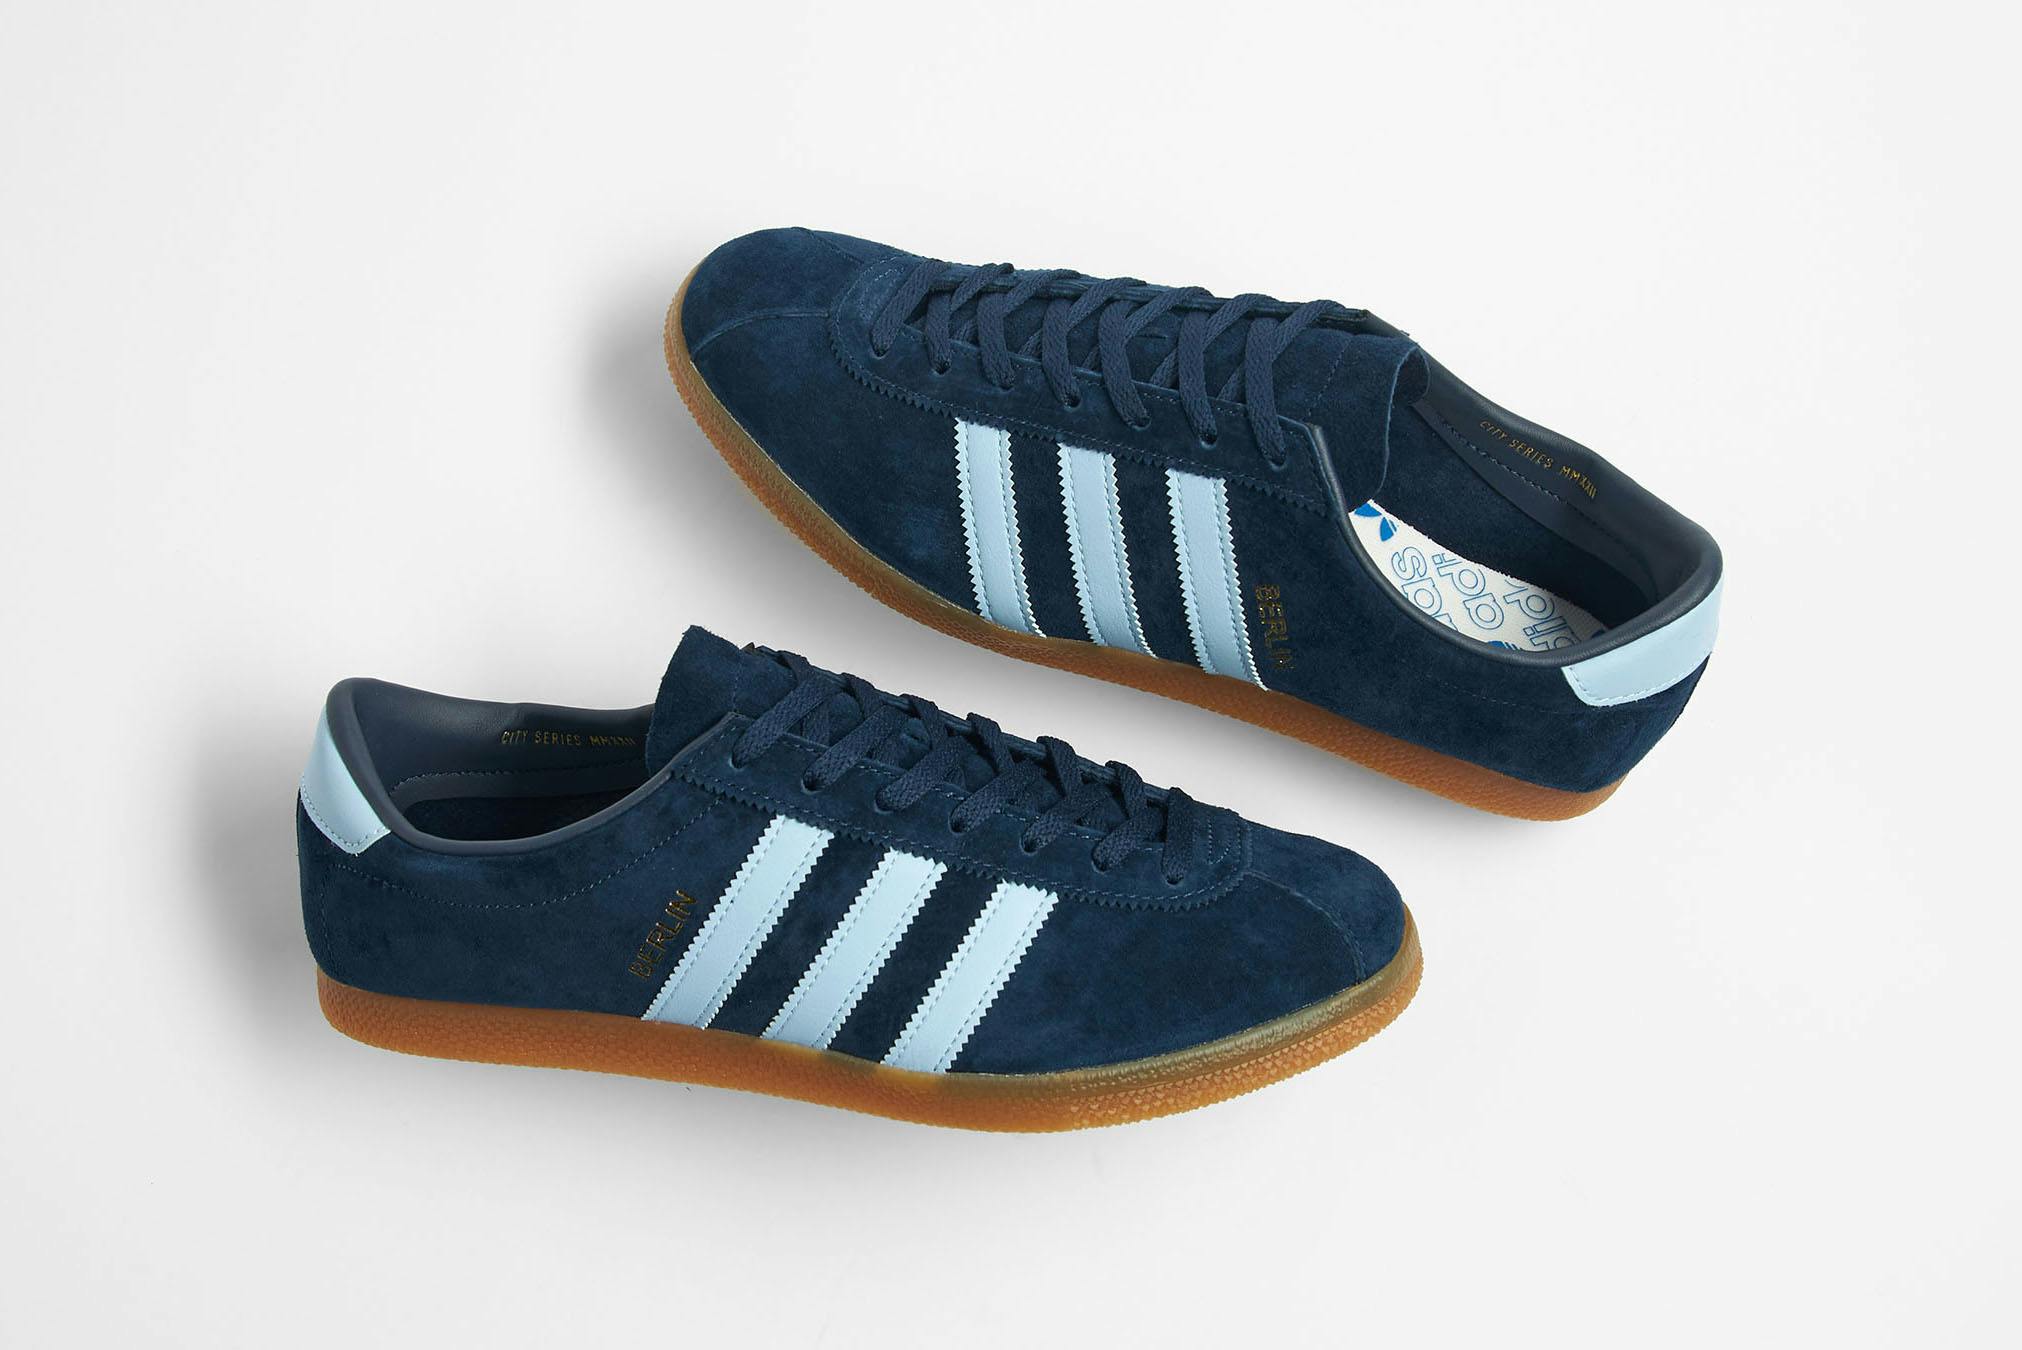 ADIDAS BERLIN: An Indelible Imprint in City Series Legacy | END.